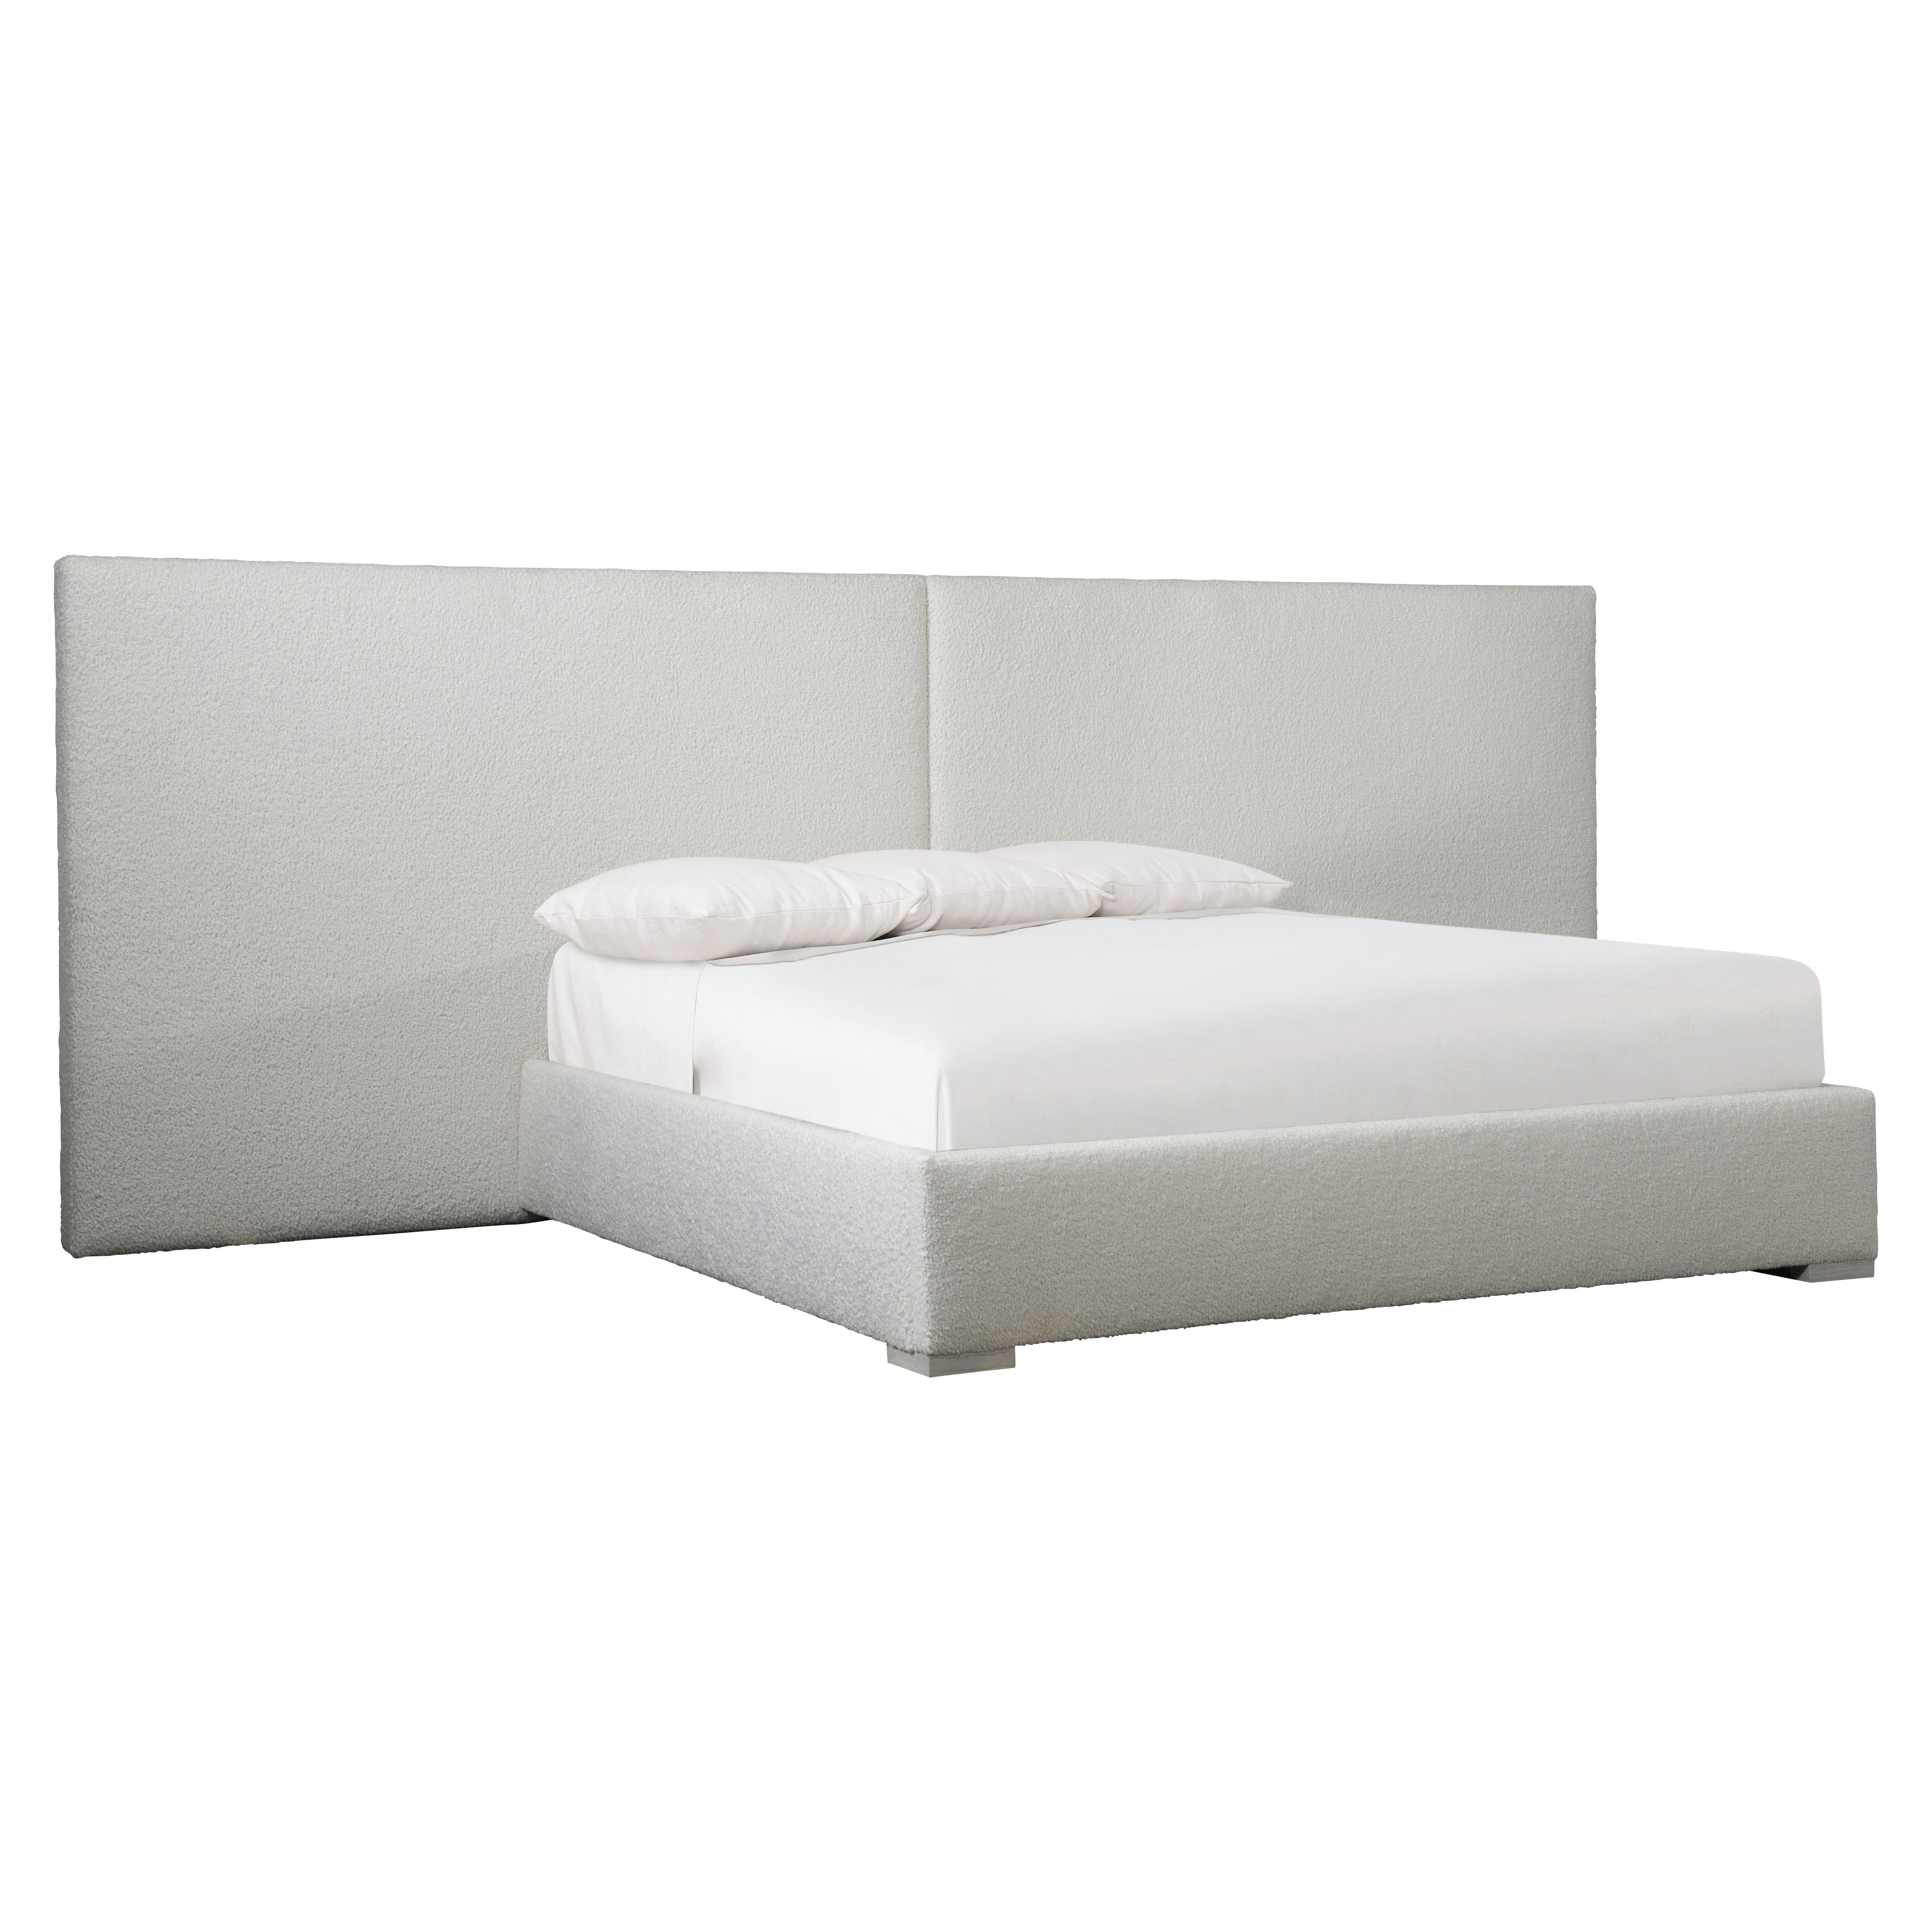 Solaria King Dual Headboard Fully Upholstered Panel Bed